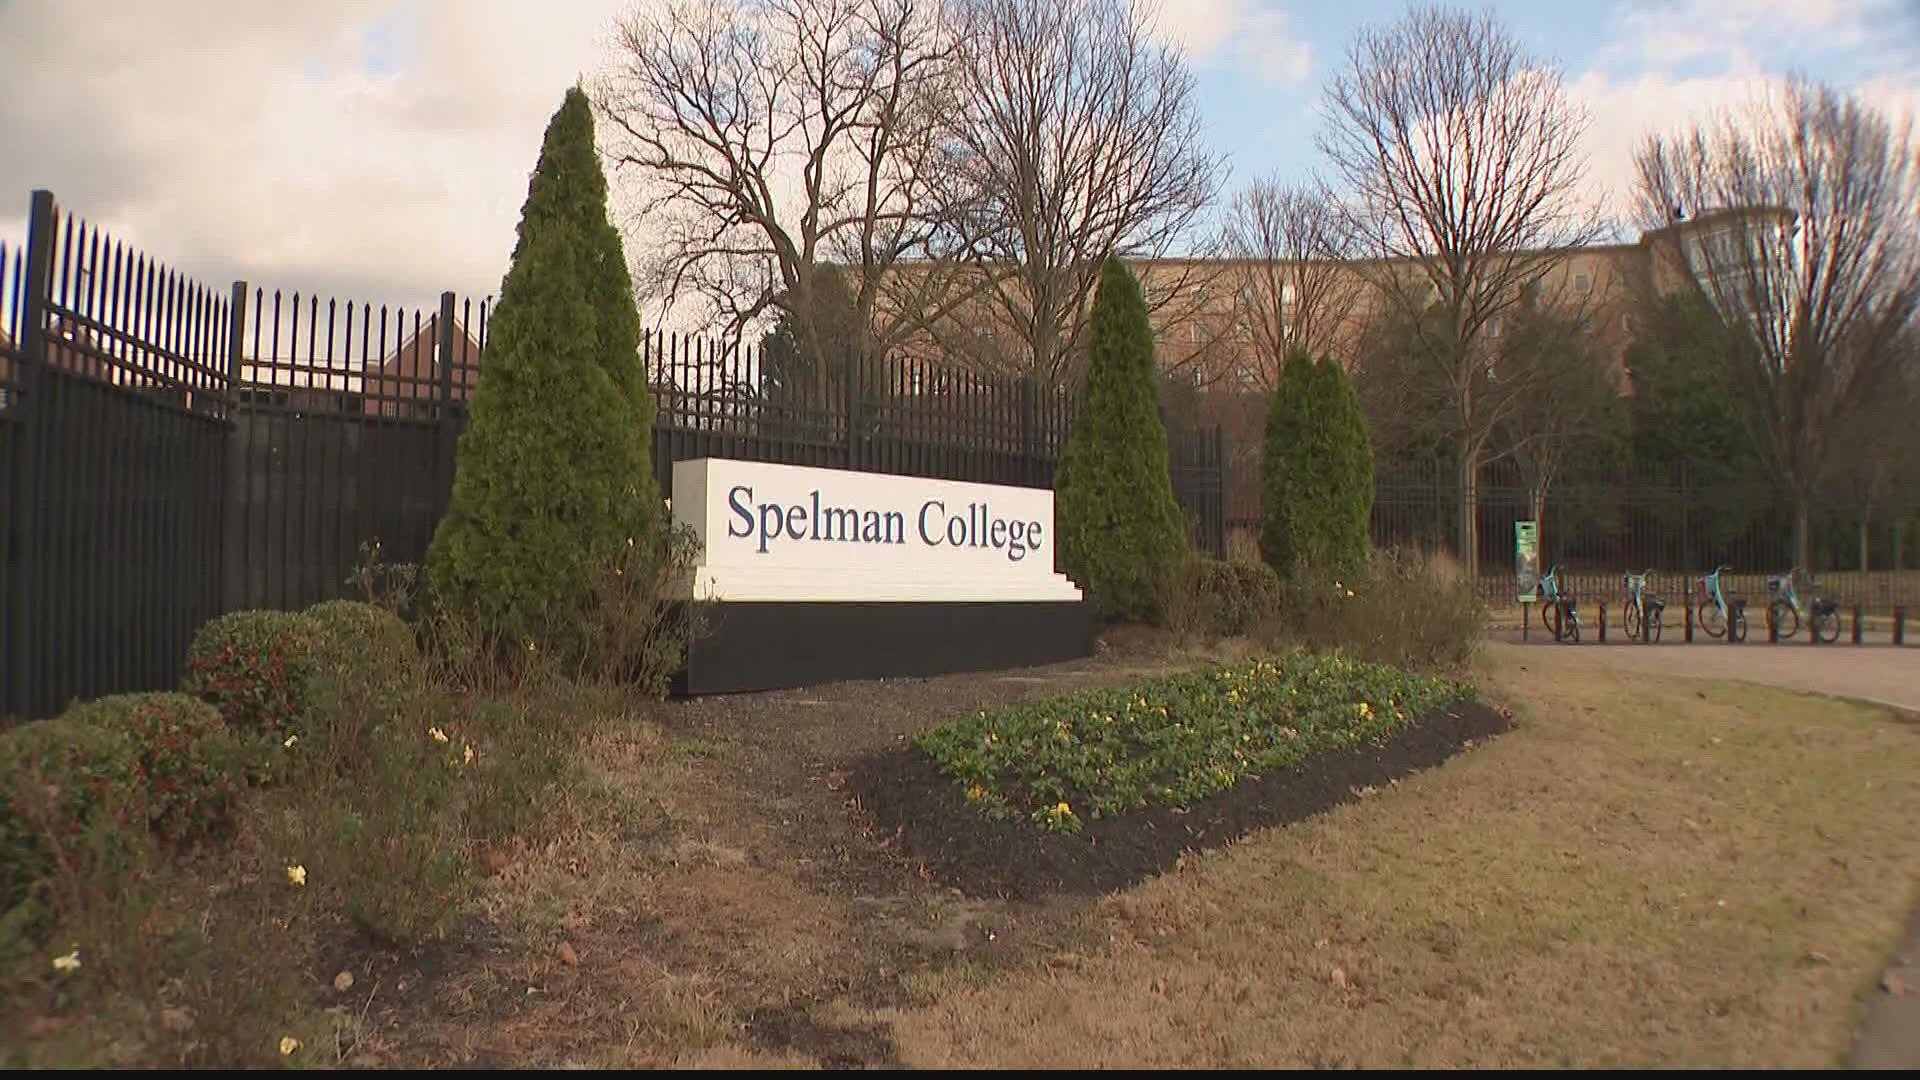 Spelman College is set to receive multiple federal grants to improve technology and safety within the school.